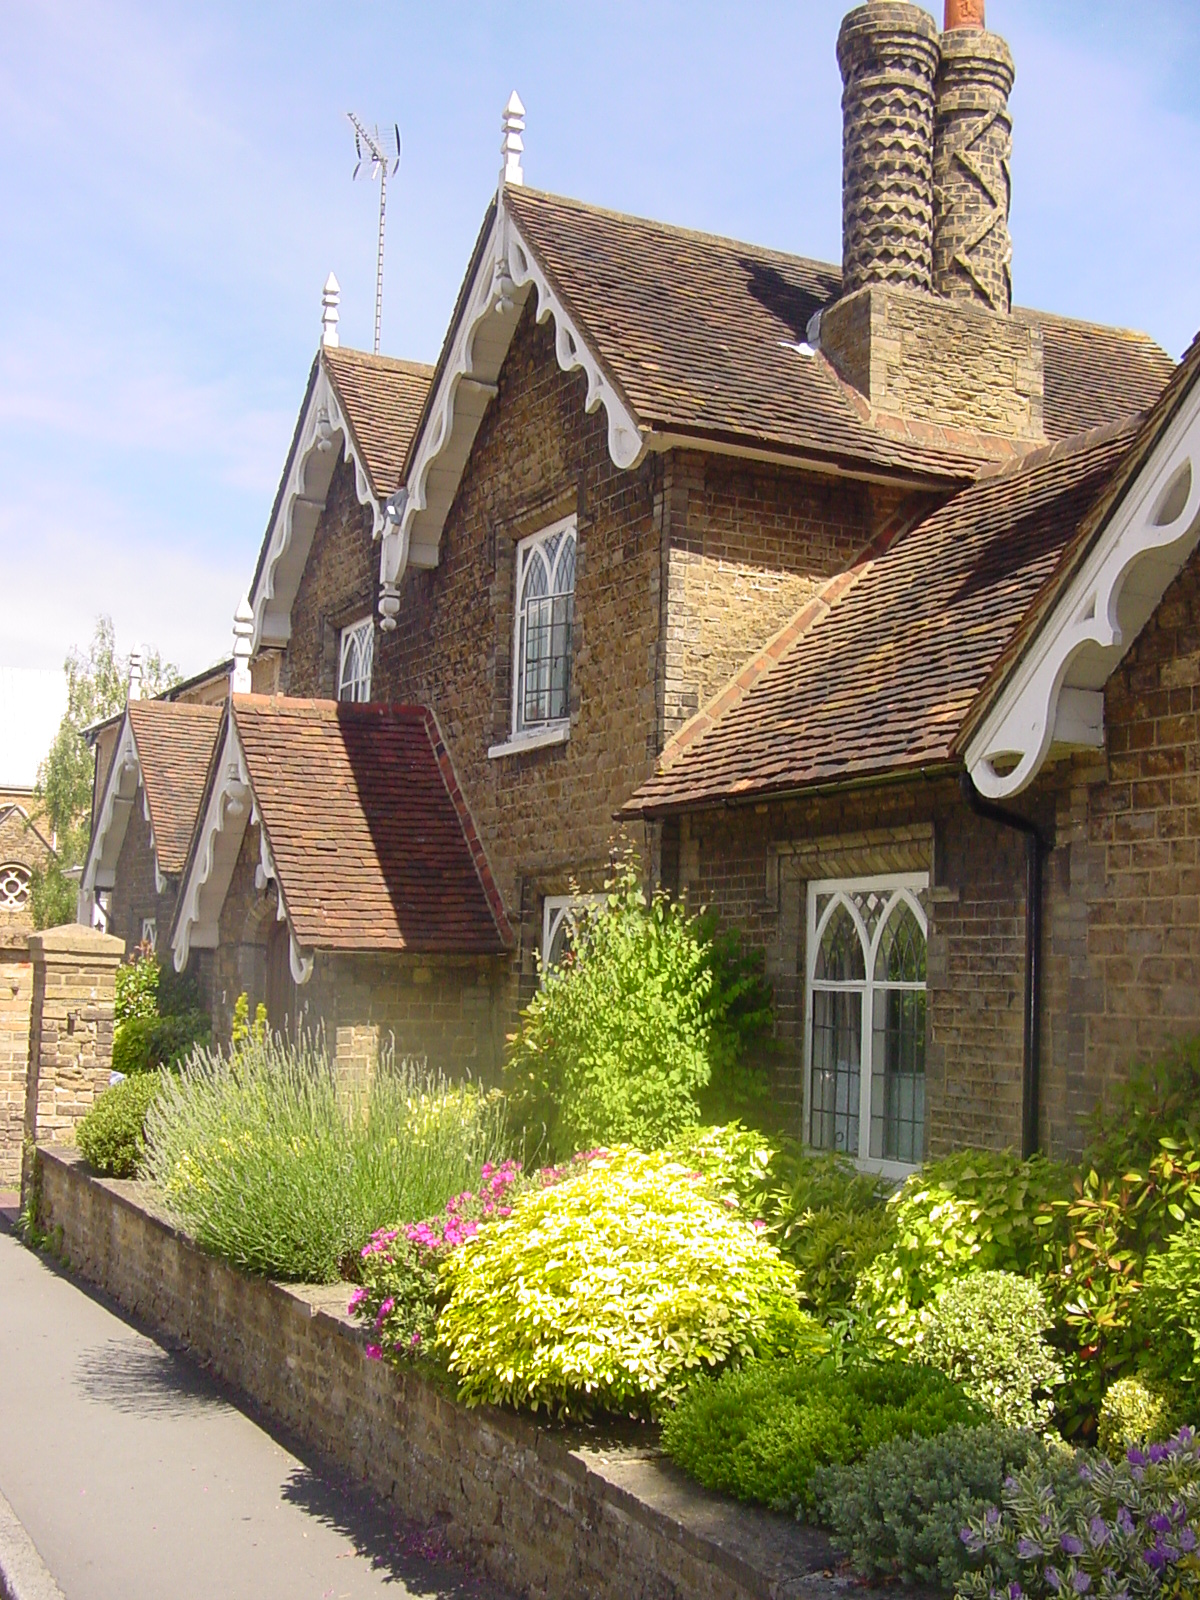 Side street view of the cottages on a sunny day with green planting